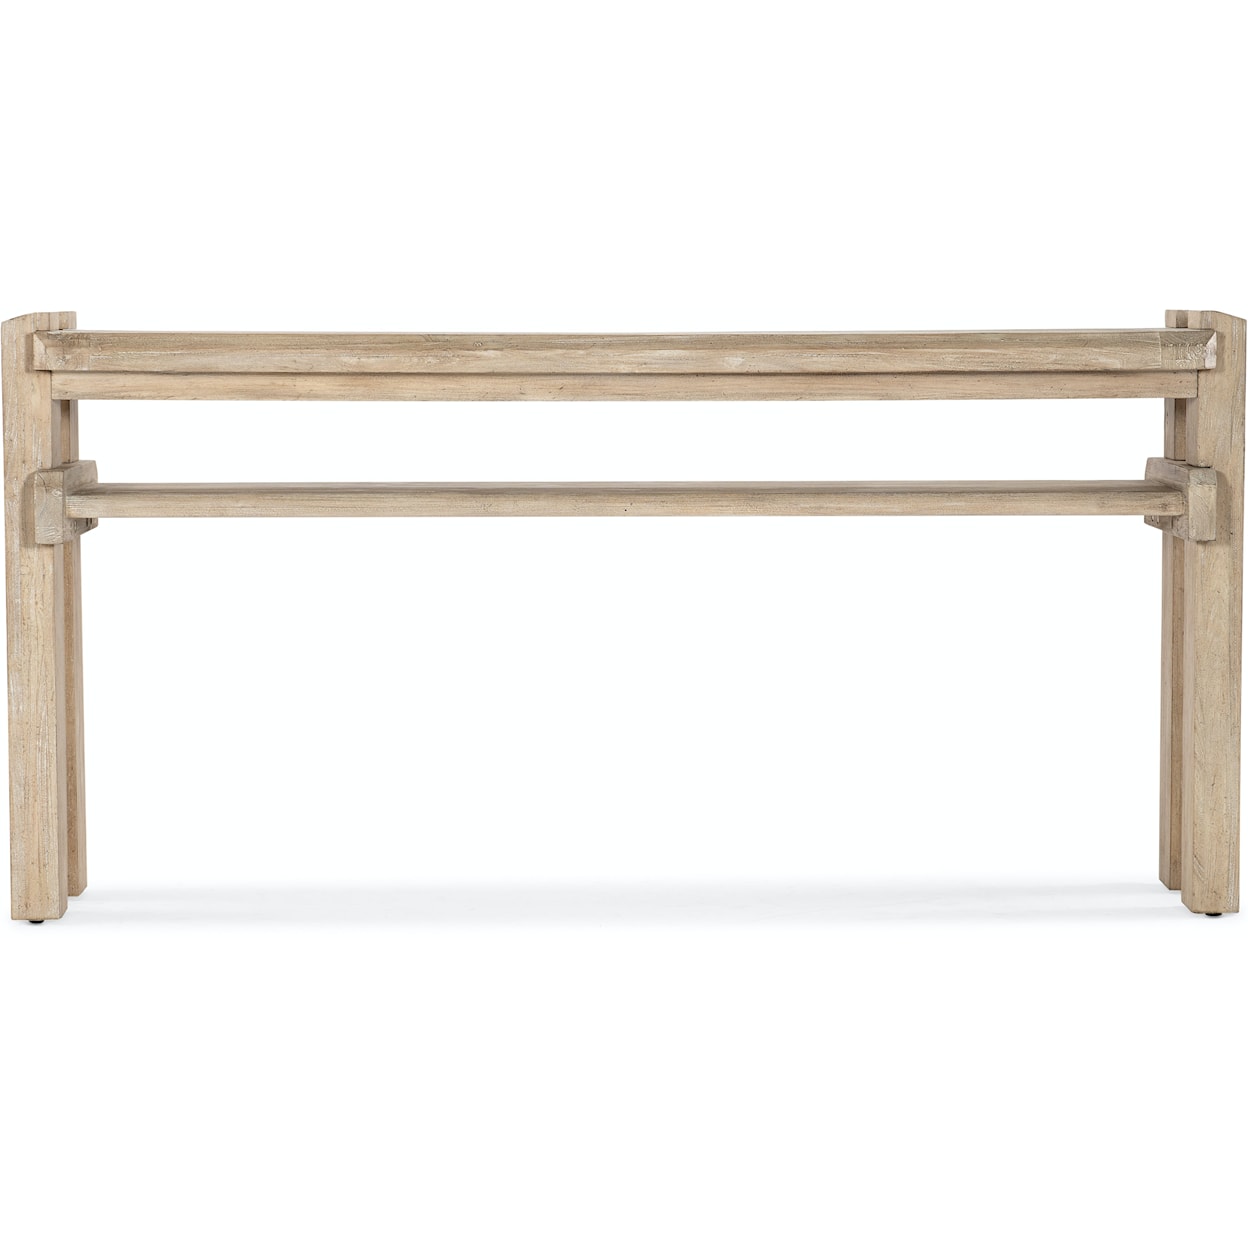 Hooker Furniture Commerce and Market Sofa Table with Shelf